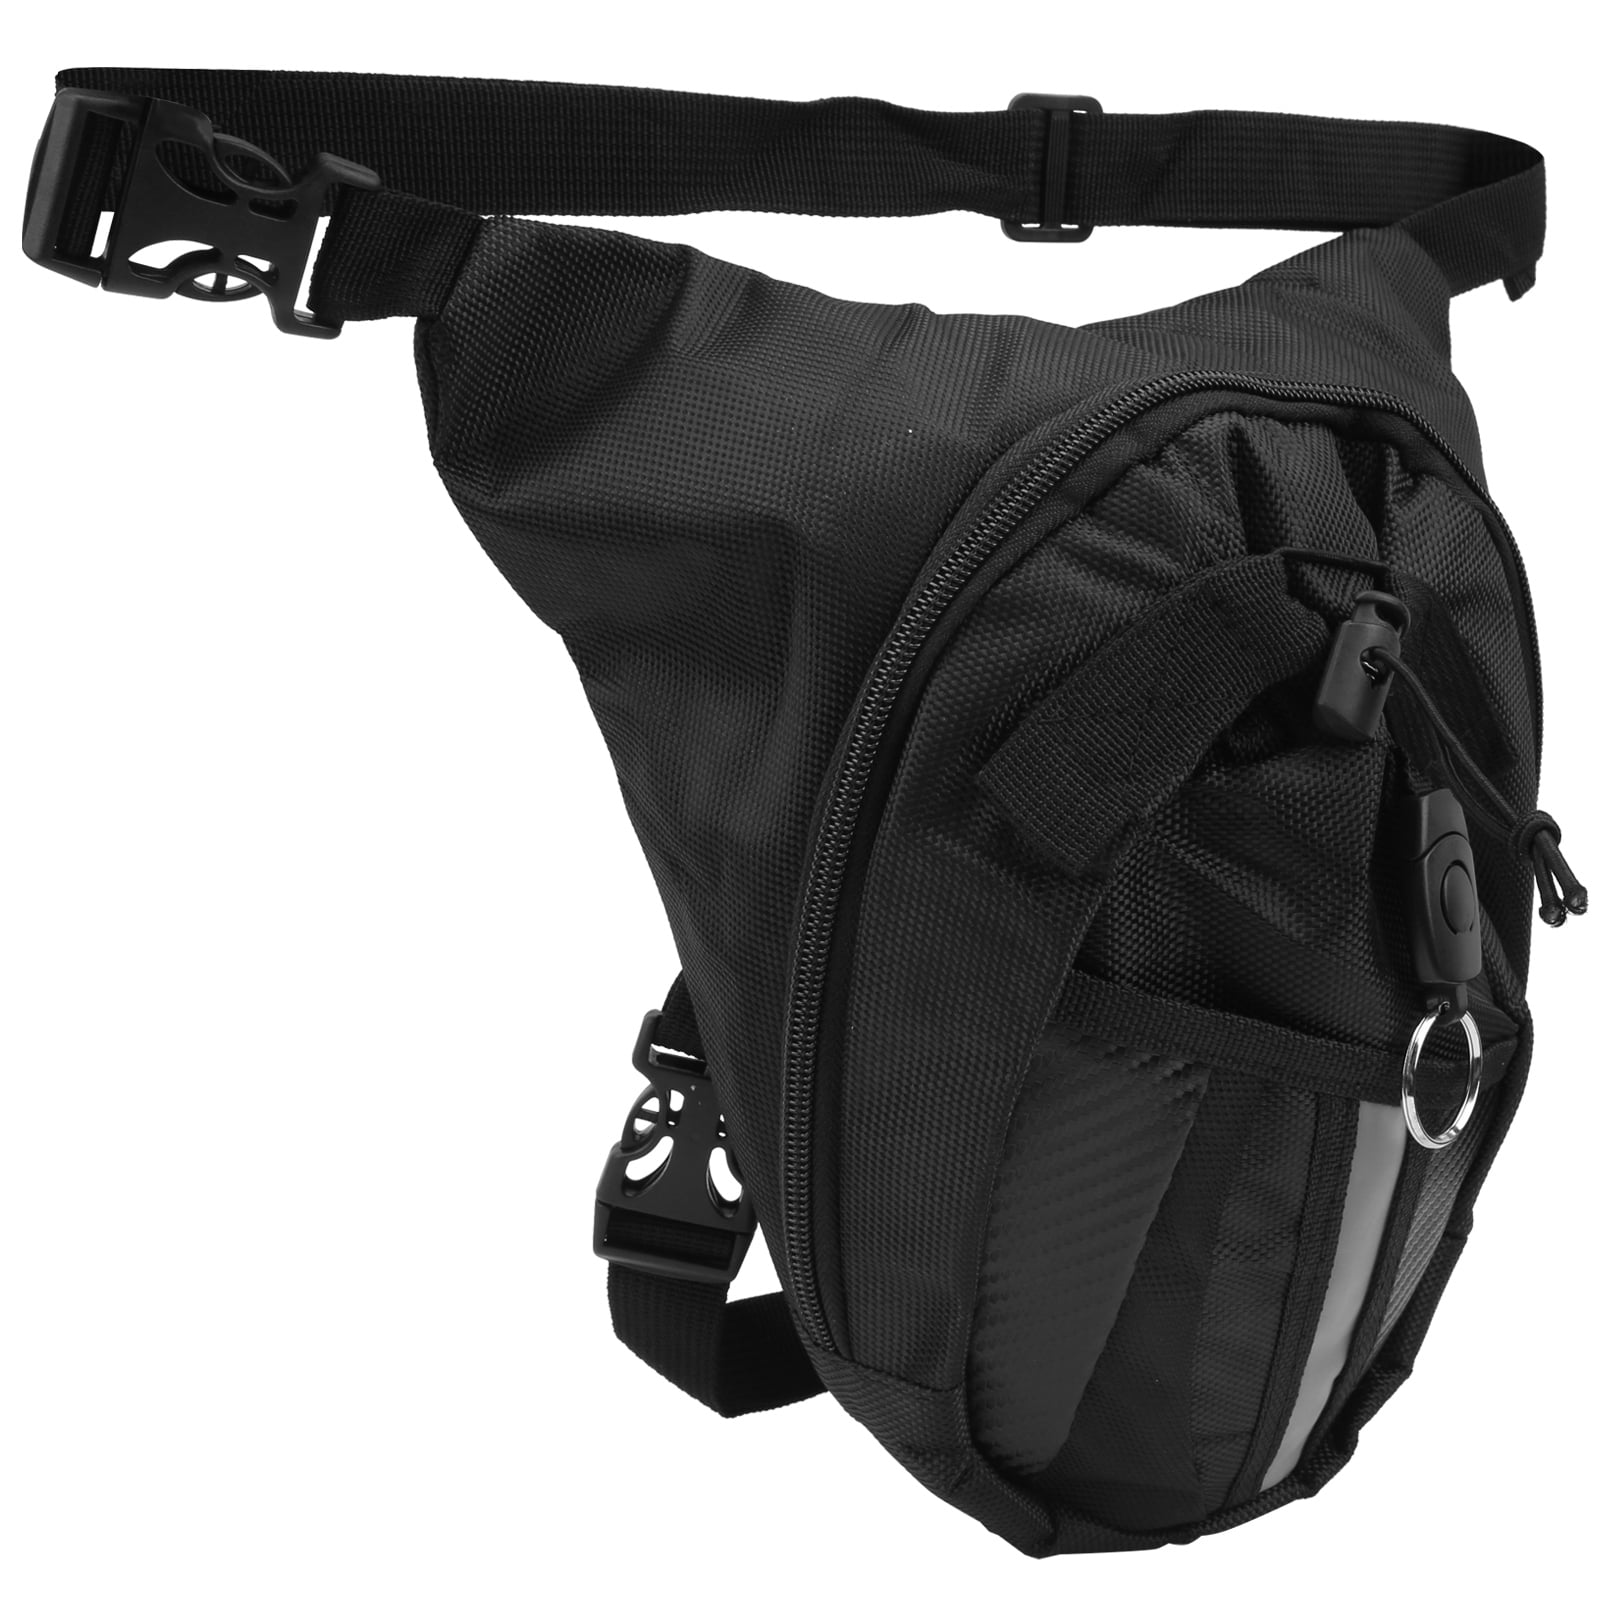 Outdoor Waist Pack, Fanny Pack, Motorcycle Oxford Leg Bag Fishing Bag ...